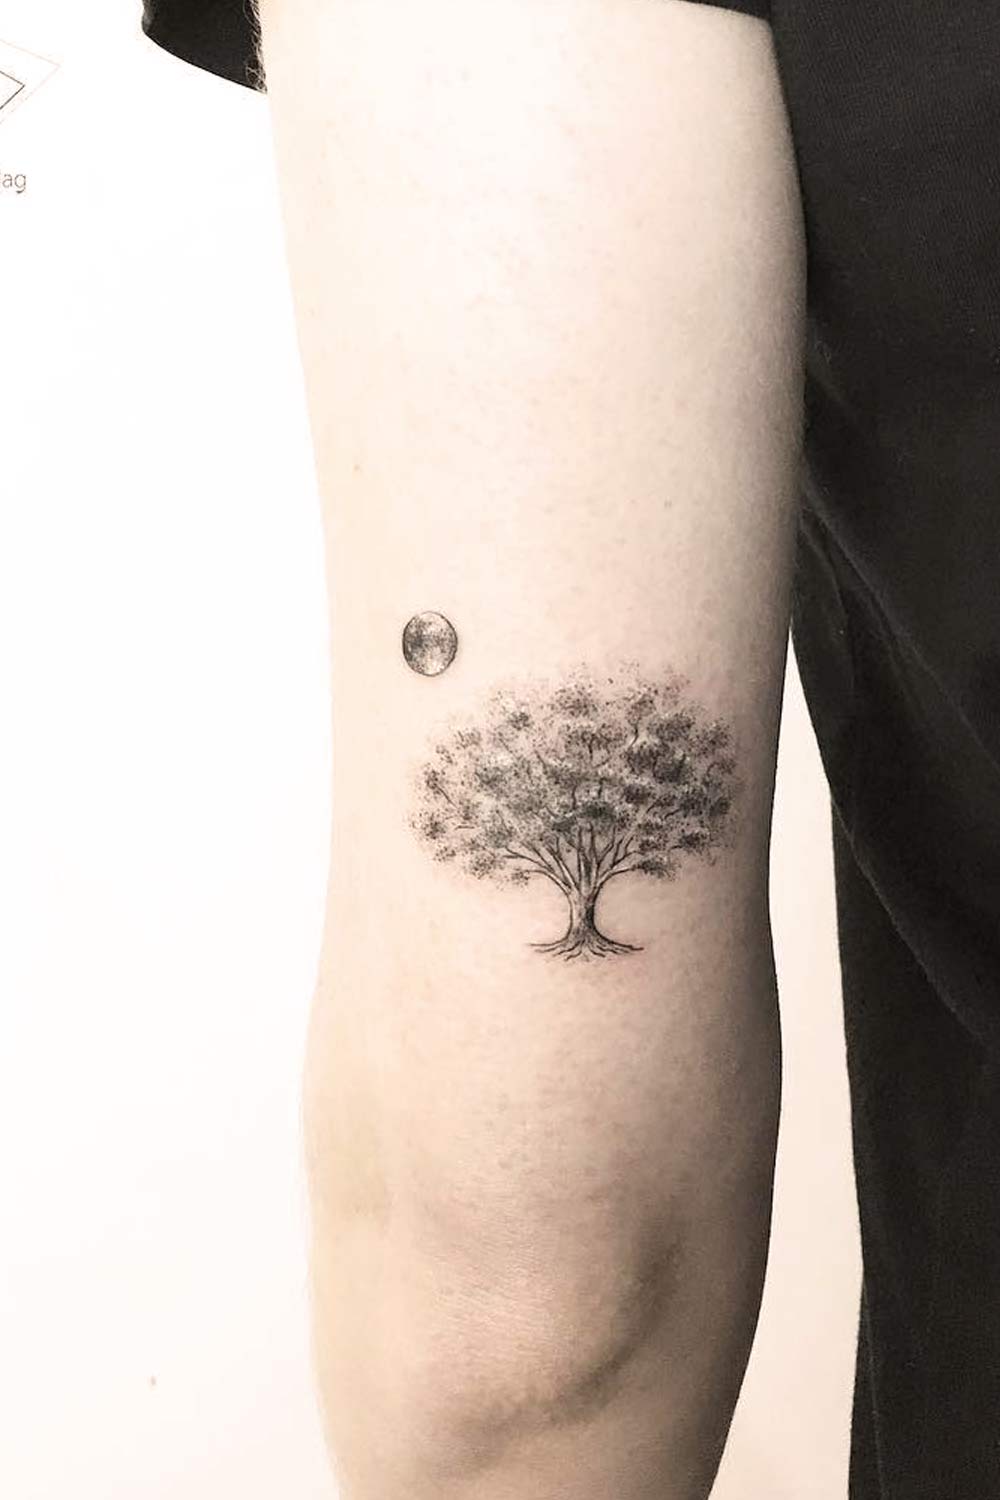 20 Meaningful and Beautiful Moon Tattoo Ideas [Updated]